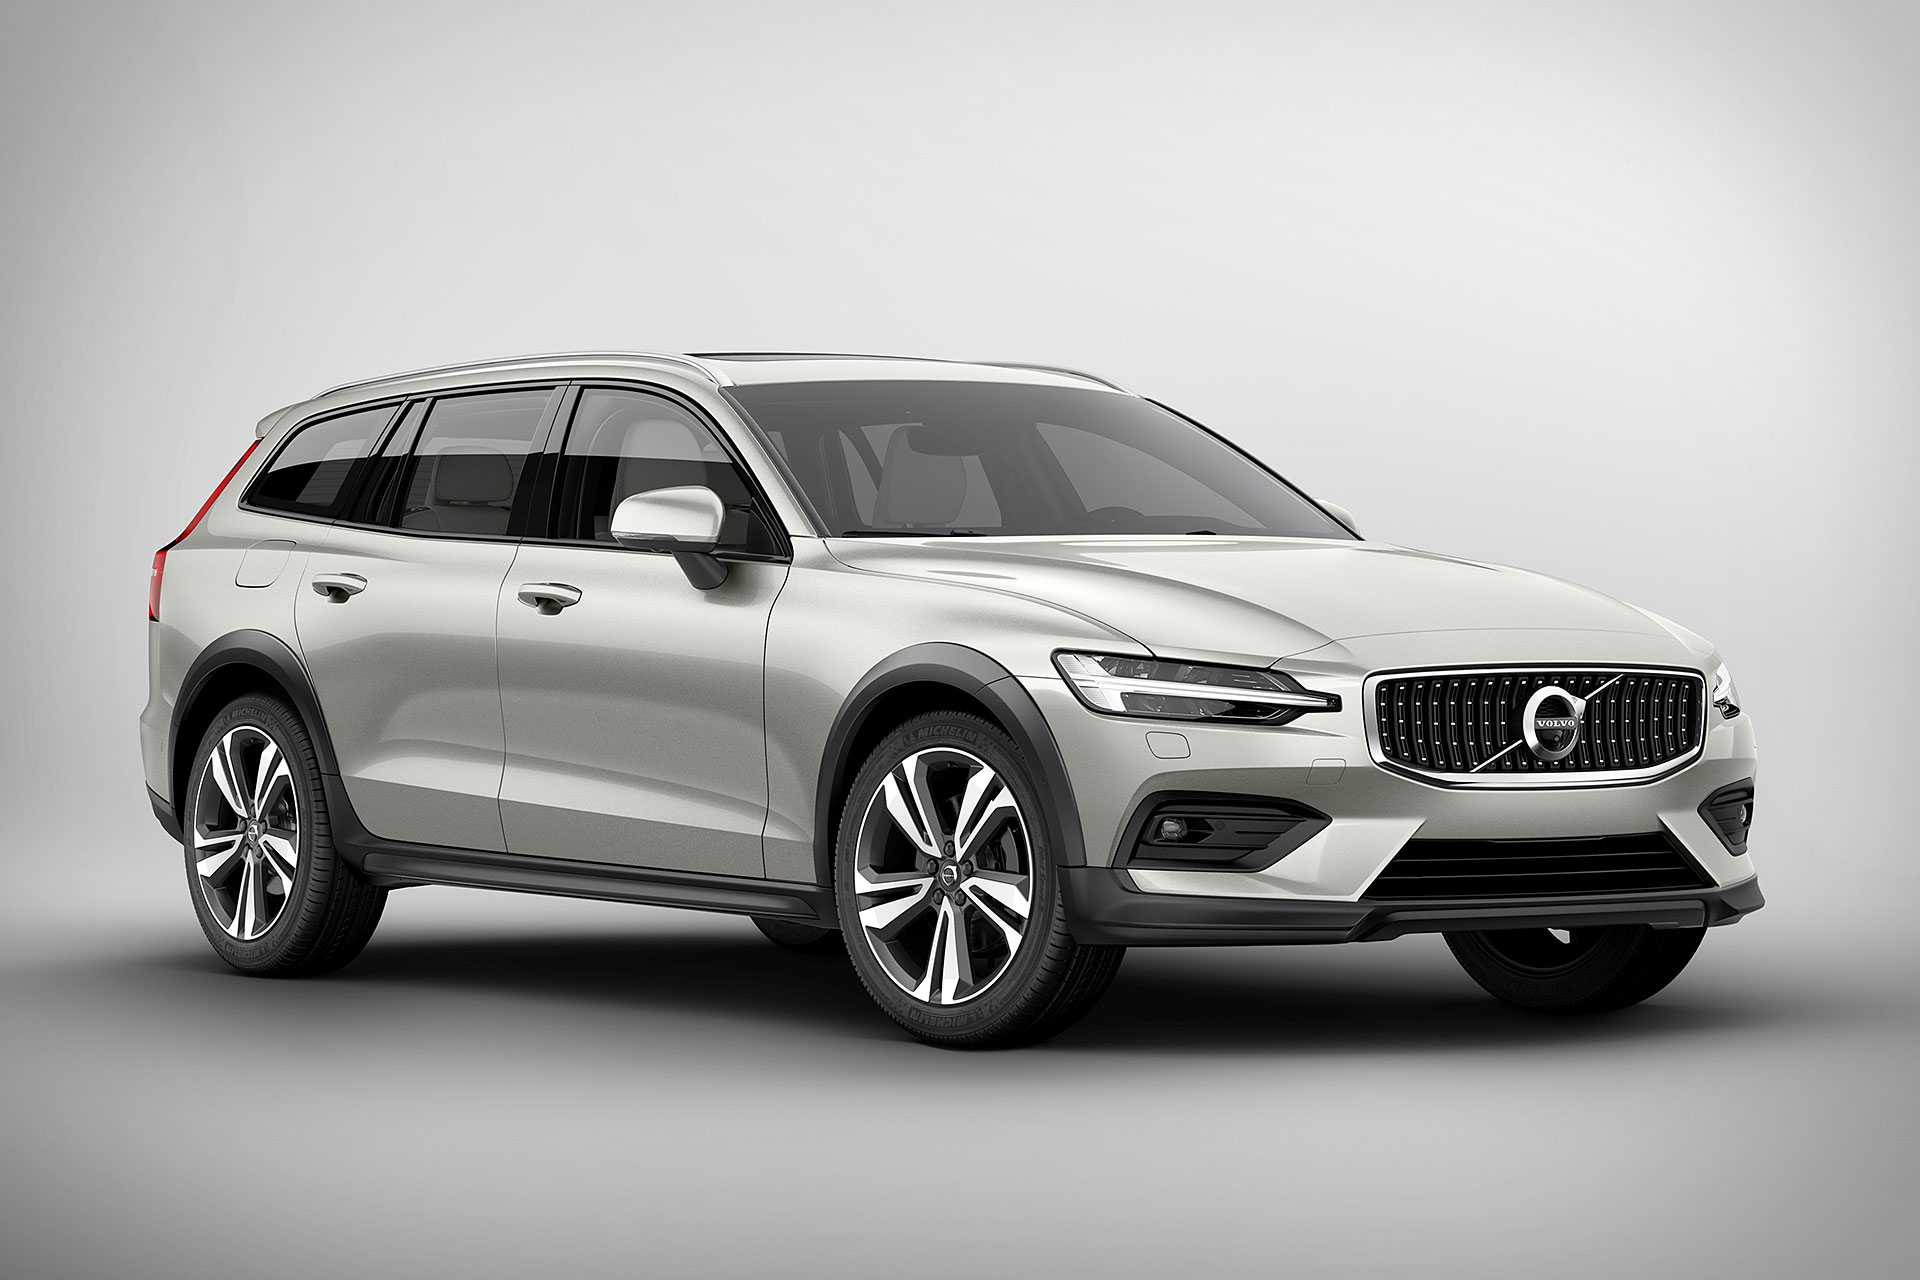 2019 Volvo V60 Cross Country Wagon | Uncrate
